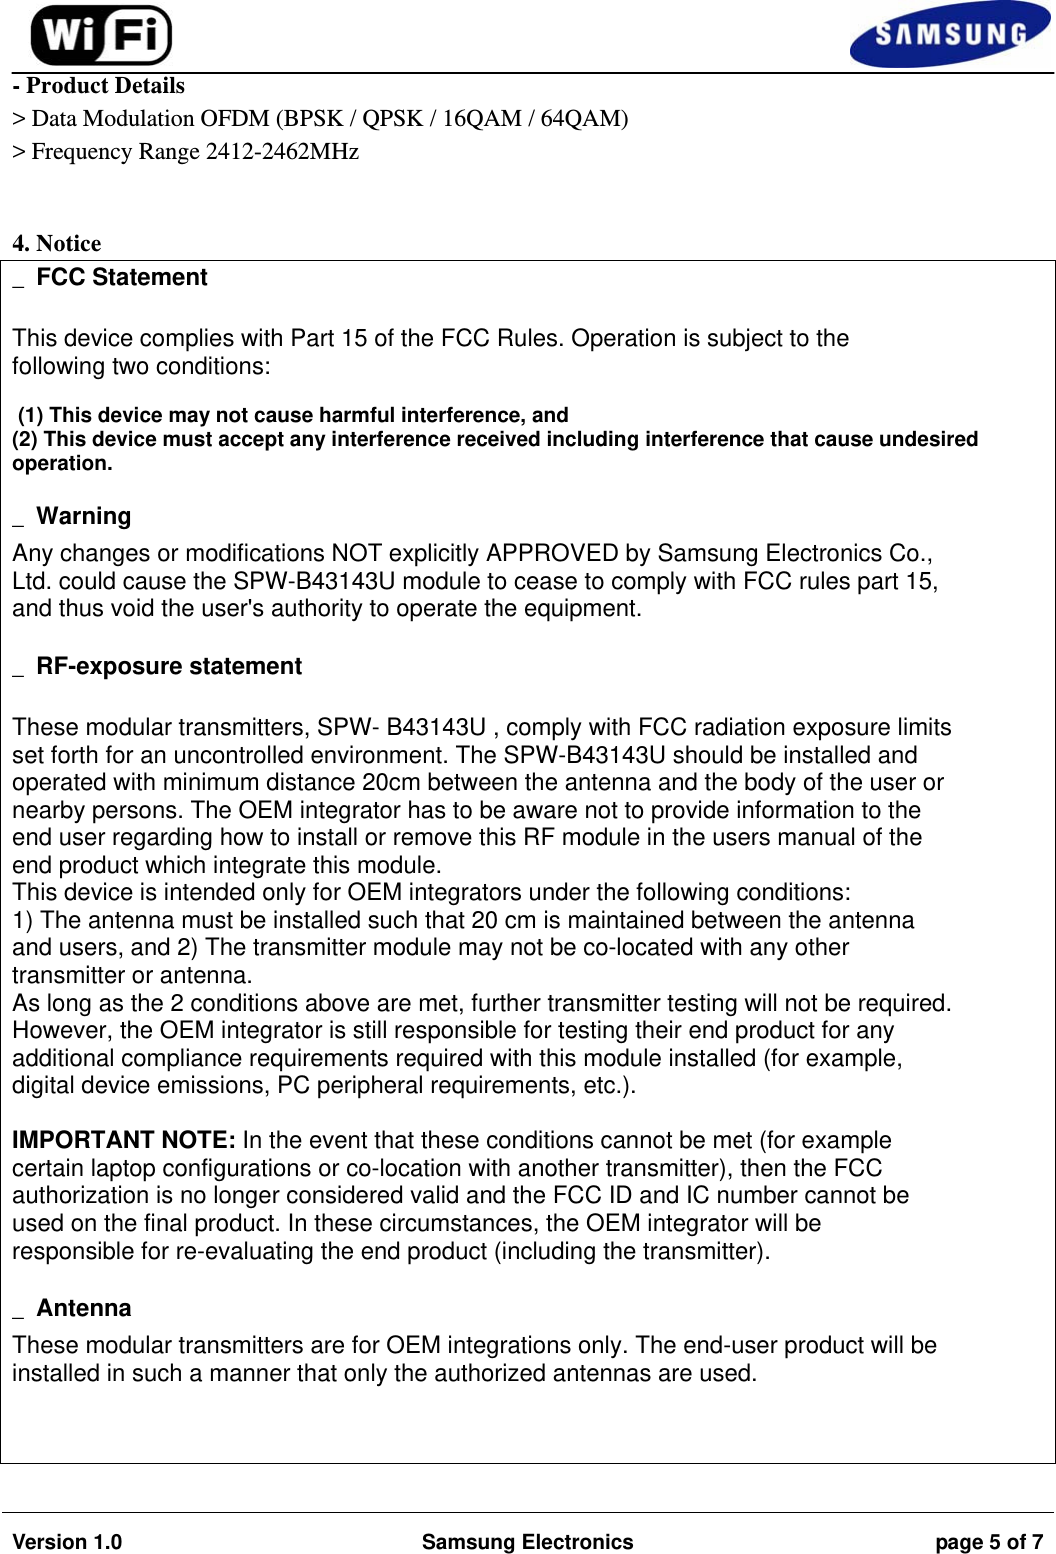                                                                                                                                         Version 1.0  Samsung Electronics  page 5 of 7   - Product Details &gt; Data Modulation OFDM (BPSK / QPSK / 16QAM / 64QAM) &gt; Frequency Range 2412-2462MHz                                   4. Notice _ FCC Statement  This device complies with Part 15 of the FCC Rules. Operation is subject to the following two conditions:   (1) This device may not cause harmful interference, and  (2) This device must accept any interference received including interference that cause undesired operation.   _ Warning Any changes or modifications NOT explicitly APPROVED by Samsung Electronics Co., Ltd. could cause the SPW-B43143U module to cease to comply with FCC rules part 15, and thus void the user&apos;s authority to operate the equipment.  _ RF-exposure statement  These modular transmitters, SPW- B43143U , comply with FCC radiation exposure limits set forth for an uncontrolled environment. The SPW-B43143U should be installed and operated with minimum distance 20cm between the antenna and the body of the user or nearby persons. The OEM integrator has to be aware not to provide information to the end user regarding how to install or remove this RF module in the users manual of the end product which integrate this module. This device is intended only for OEM integrators under the following conditions: 1) The antenna must be installed such that 20 cm is maintained between the antenna and users, and 2) The transmitter module may not be co-located with any other transmitter or antenna. As long as the 2 conditions above are met, further transmitter testing will not be required. However, the OEM integrator is still responsible for testing their end product for any additional compliance requirements required with this module installed (for example, digital device emissions, PC peripheral requirements, etc.).  IMPORTANT NOTE: In the event that these conditions cannot be met (for example certain laptop configurations or co-location with another transmitter), then the FCC authorization is no longer considered valid and the FCC ID and IC number cannot be used on the final product. In these circumstances, the OEM integrator will be responsible for re-evaluating the end product (including the transmitter).  _ Antenna These modular transmitters are for OEM integrations only. The end-user product will be installed in such a manner that only the authorized antennas are used.    